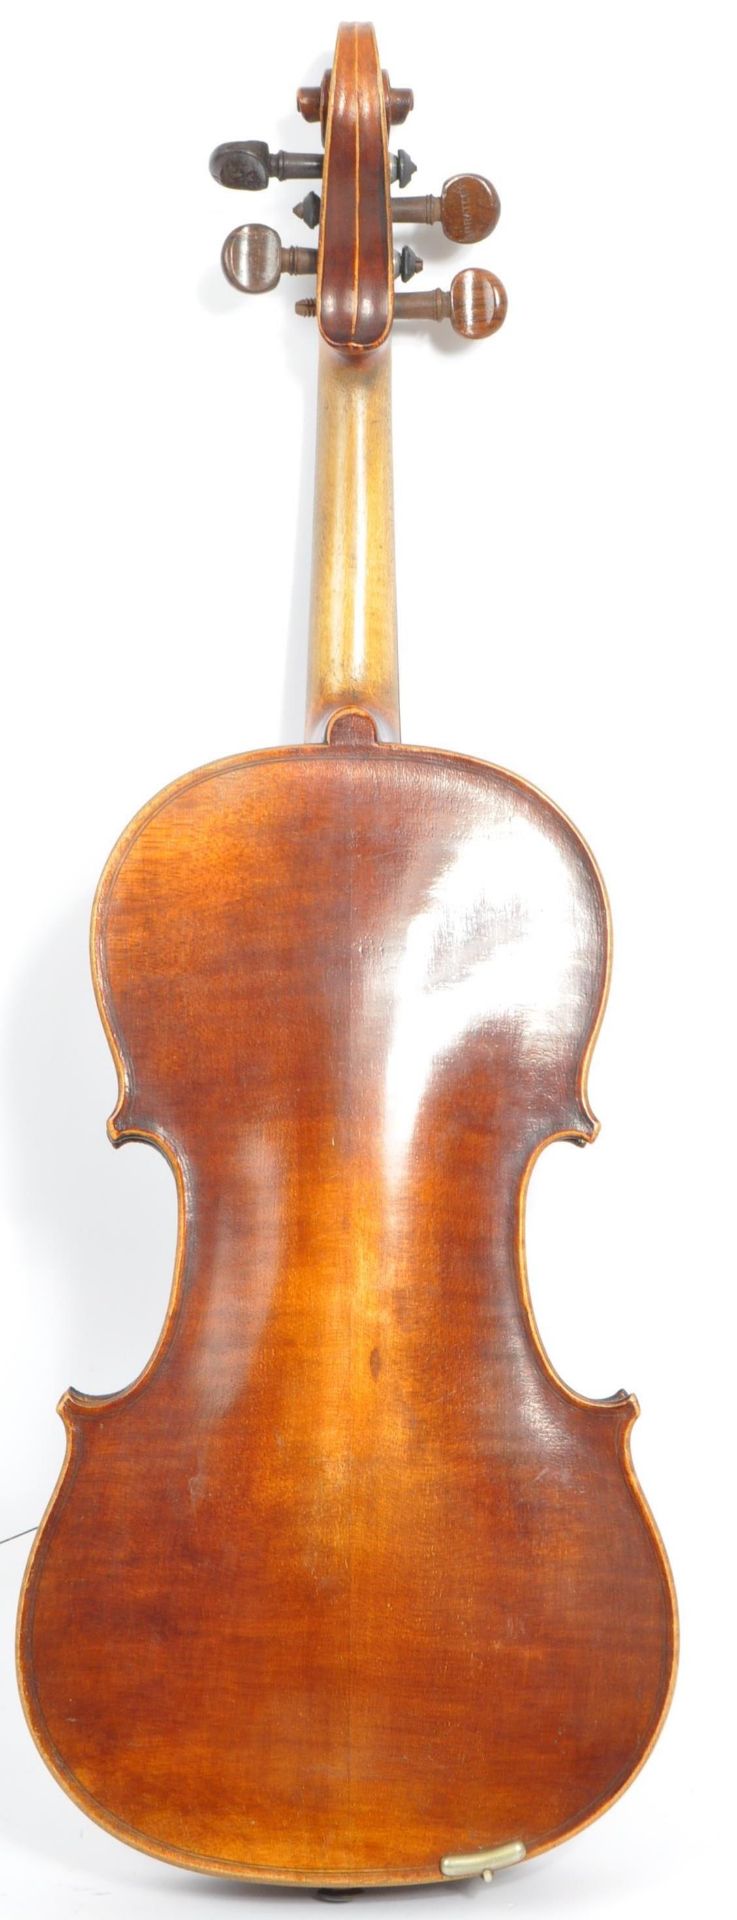 20TH CENTURY FULL SIZE VIOLIN WITH TWO PIECE BACK - Image 4 of 10